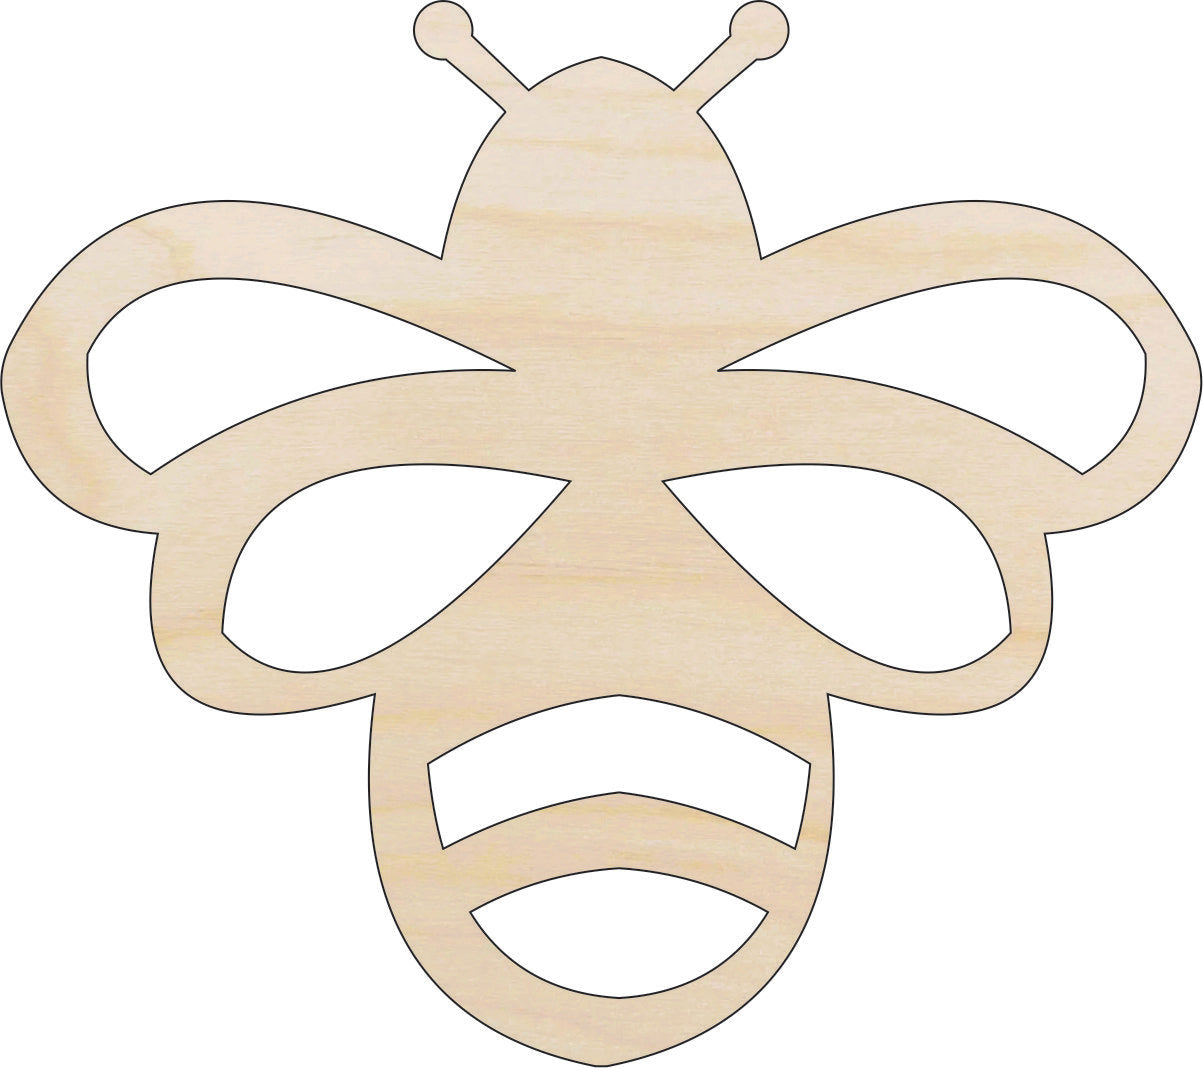 Bumble Bee Shape Unfinished Wood Cutouts Variety of Sizes